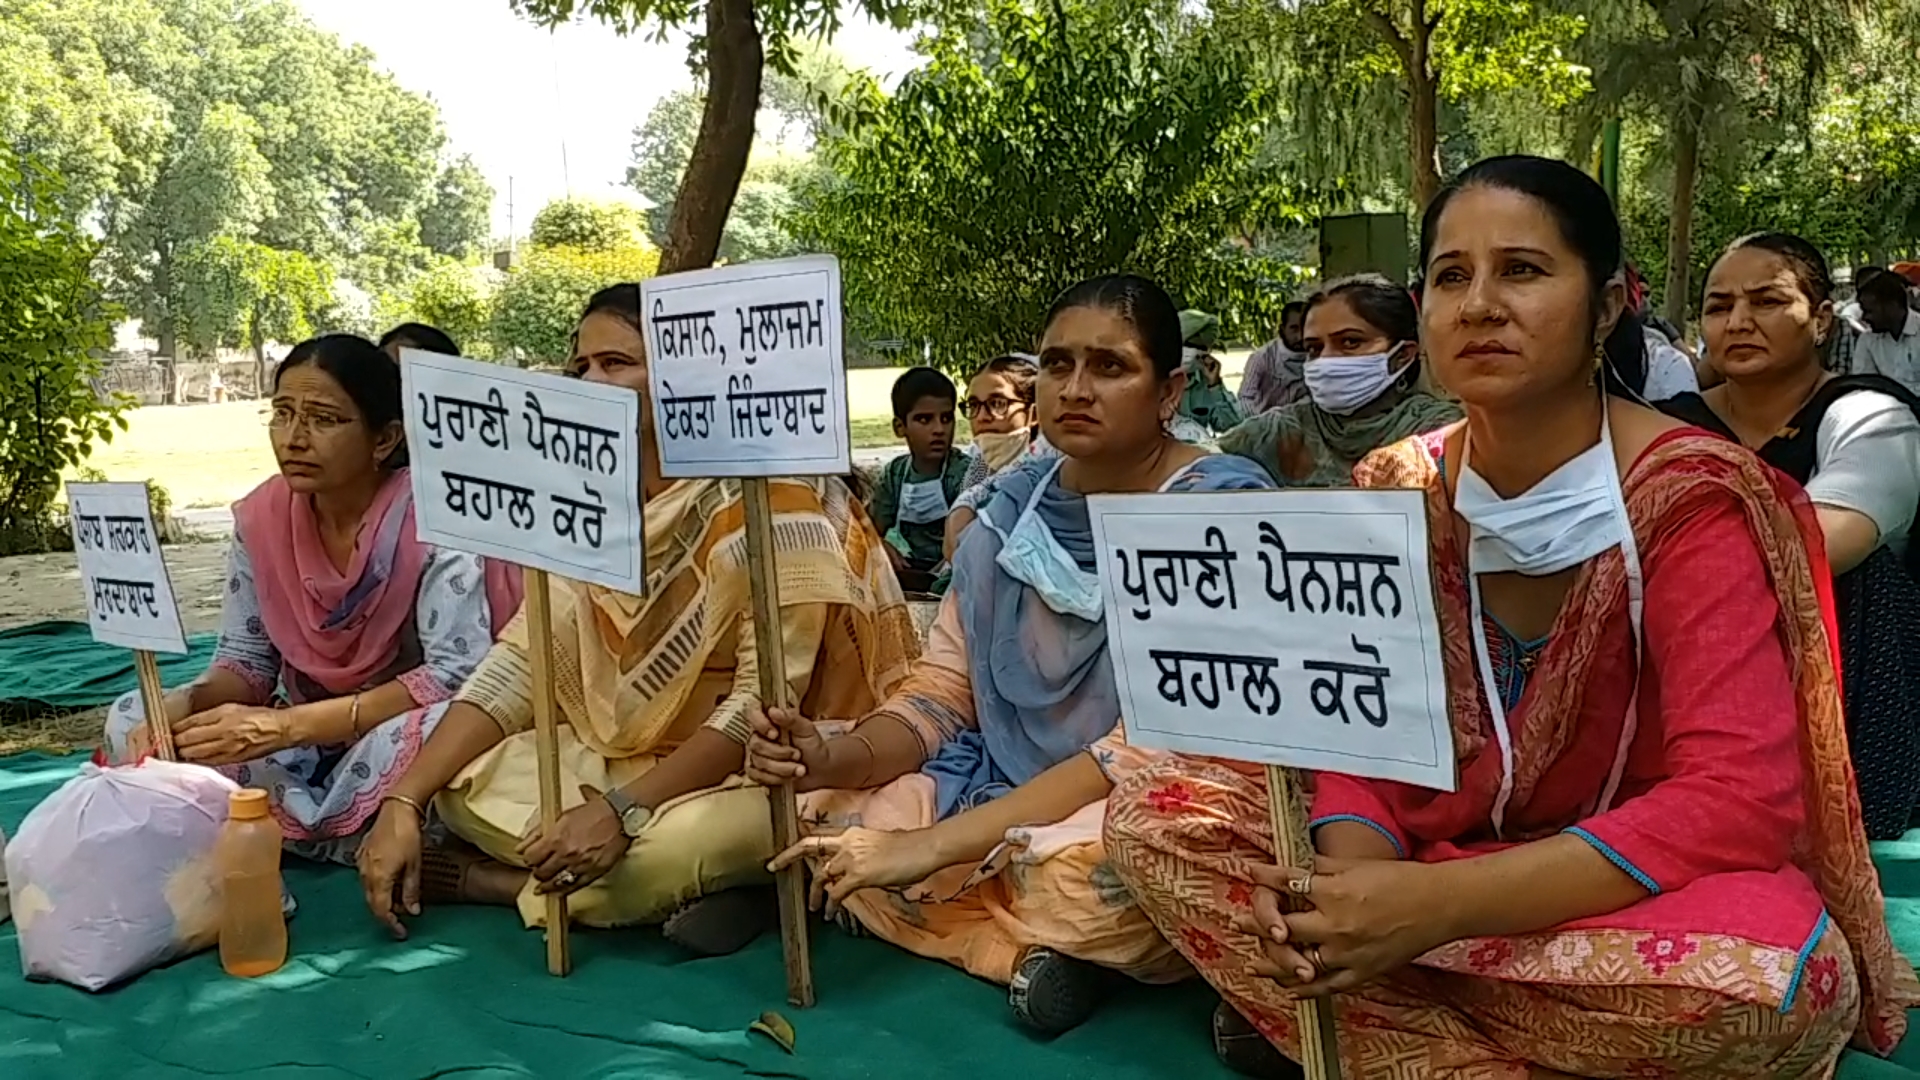 Employees of government departments staged a protest against the government demanding restoration of pension in mansa